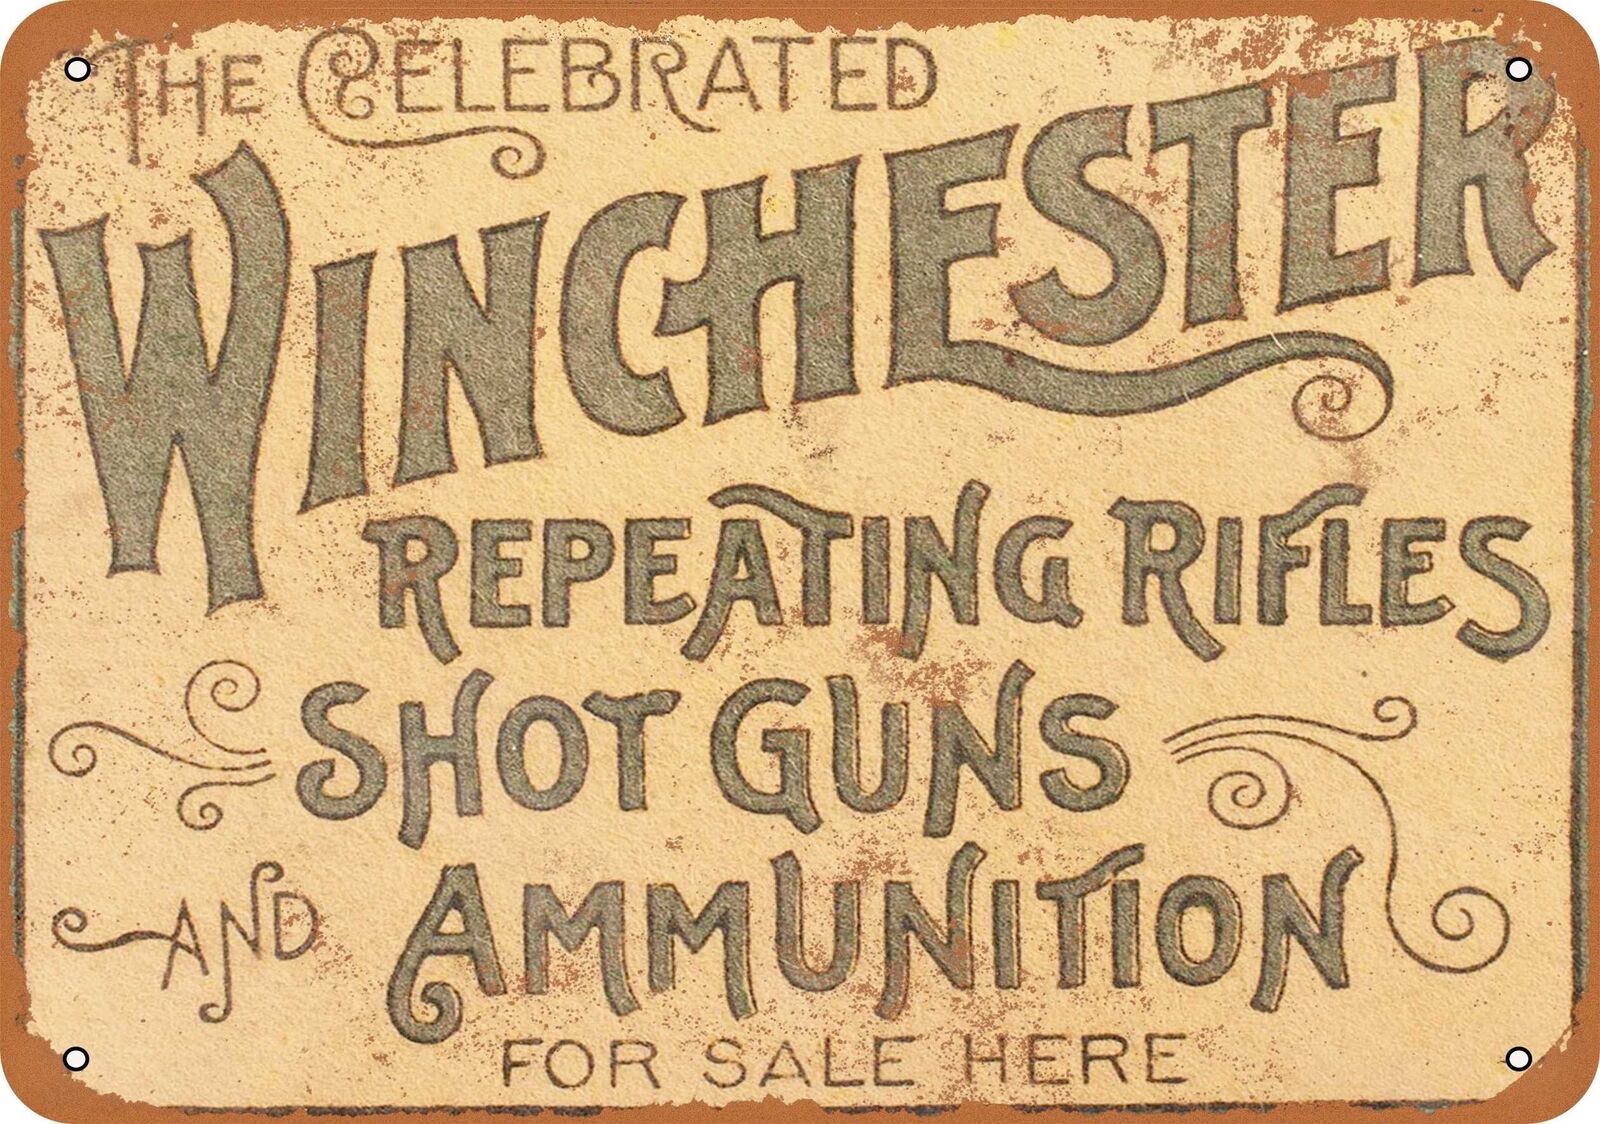 Metal Sign - 1897 Winchester Repeating Rifles - Vintage Look Reproduction